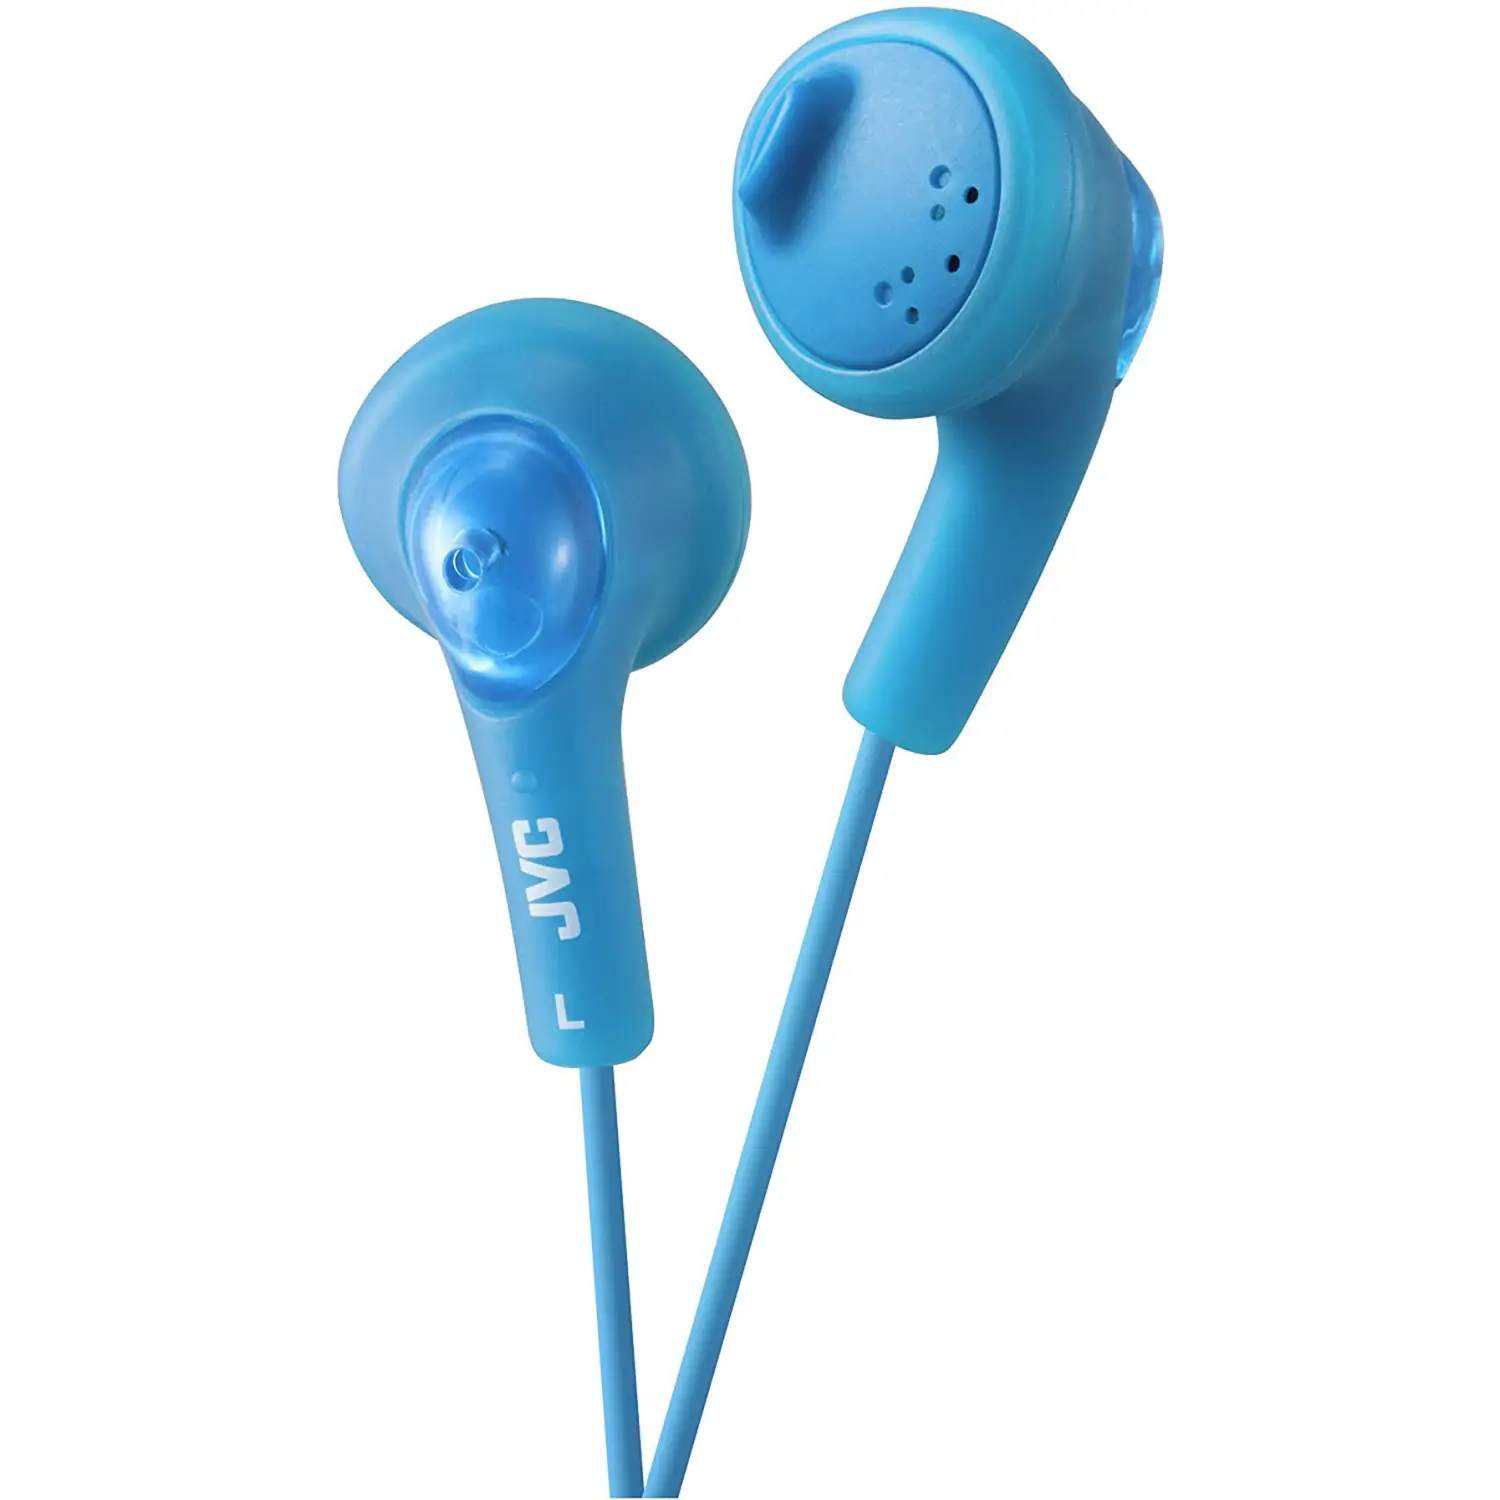 JVC Gumy Bass Boost Soft Rubber In-Ear 3Ft Wired Earbuds